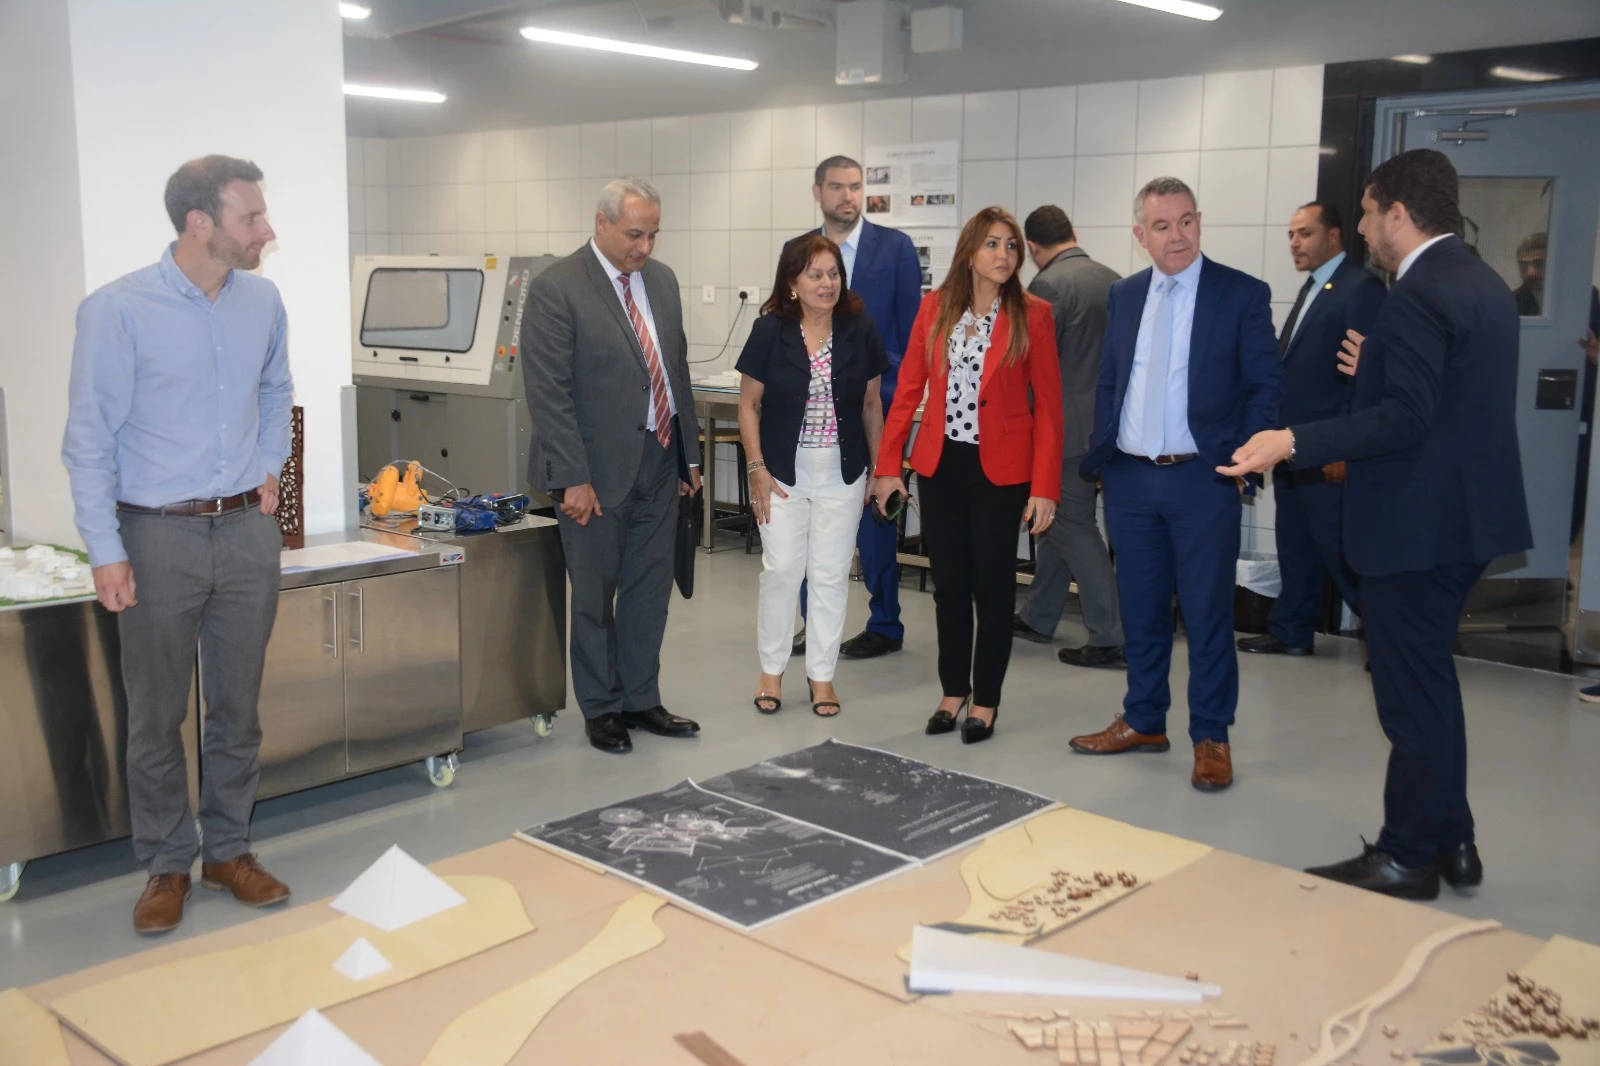 The Arab Academy for Science, Technology, and Maritime Transport (AASTMT) at Smart Village Campus welcomed a delegation from the University of Central Lancashire (UCLan)9